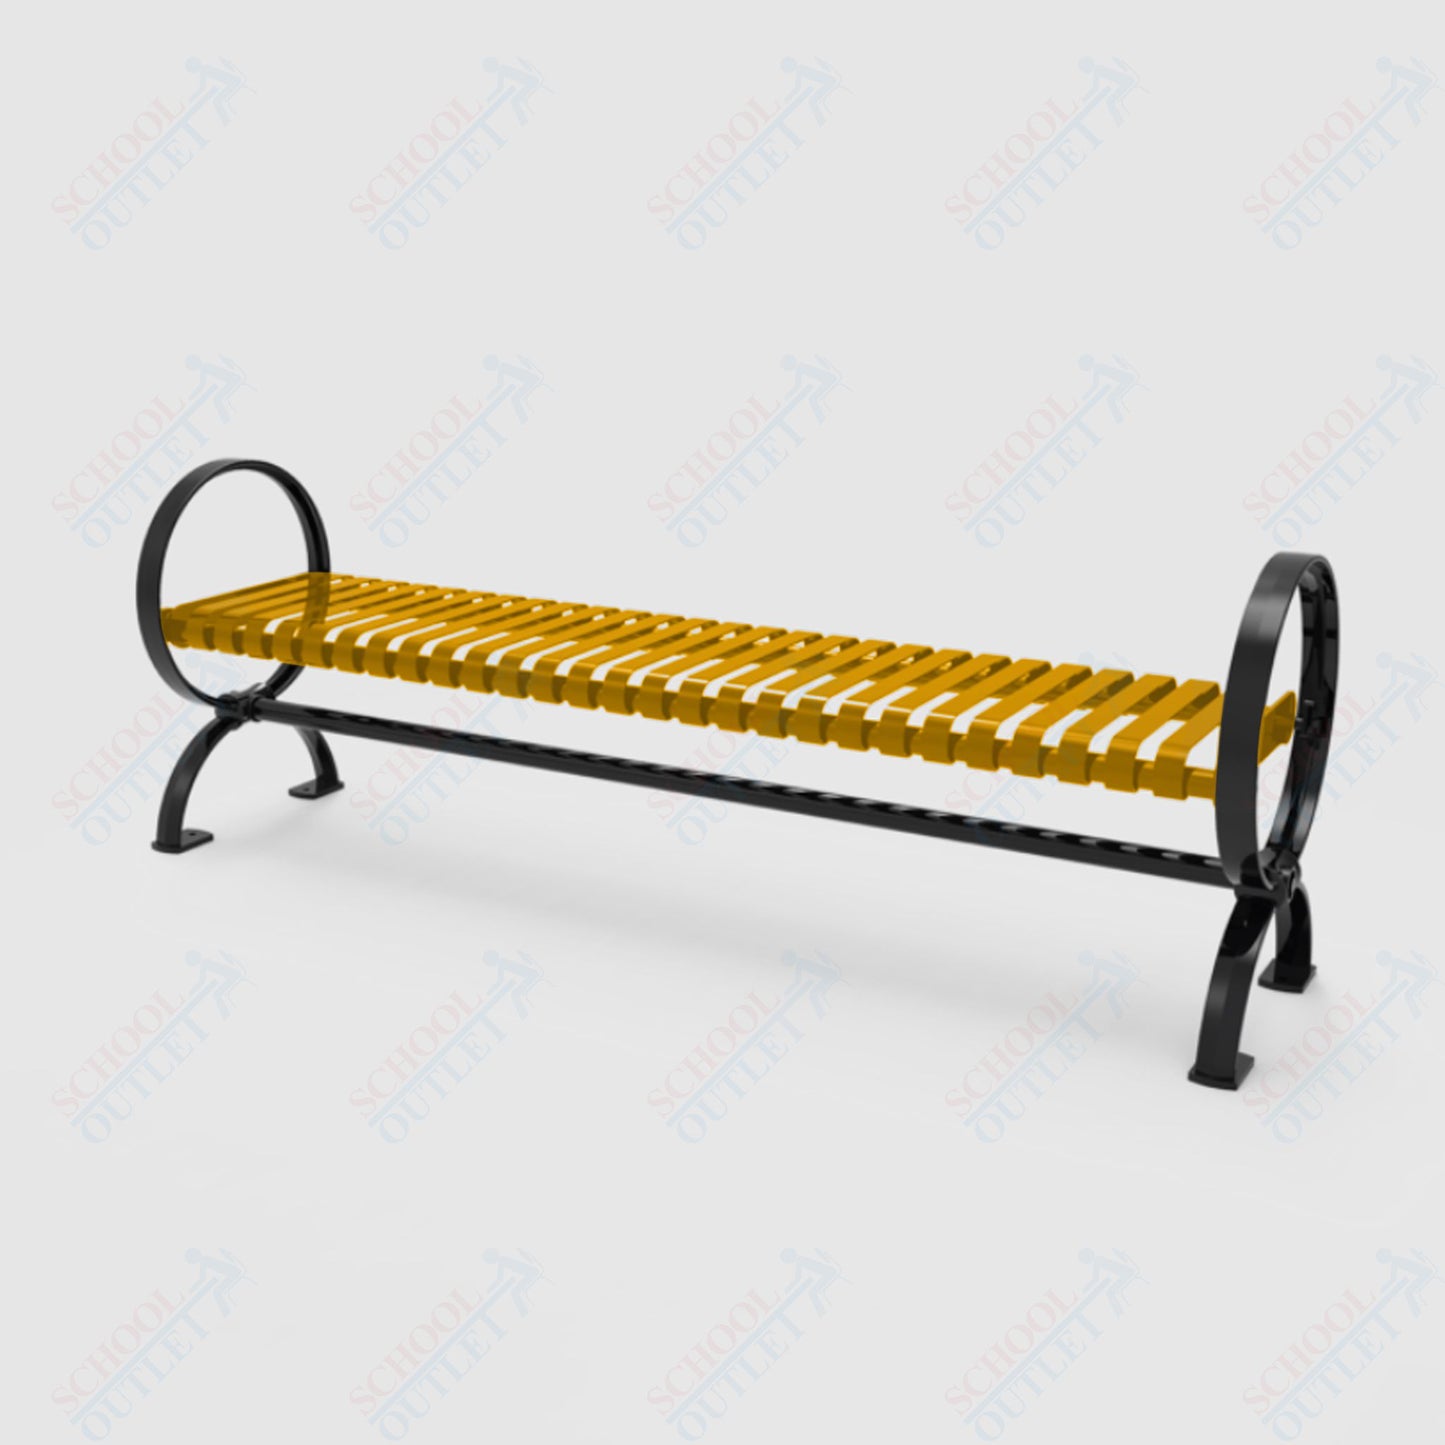 MyTcoat - Village Outdoor Bench without Back - Portable or Surface Mount 6' L (MYT-BVL06-U-58)